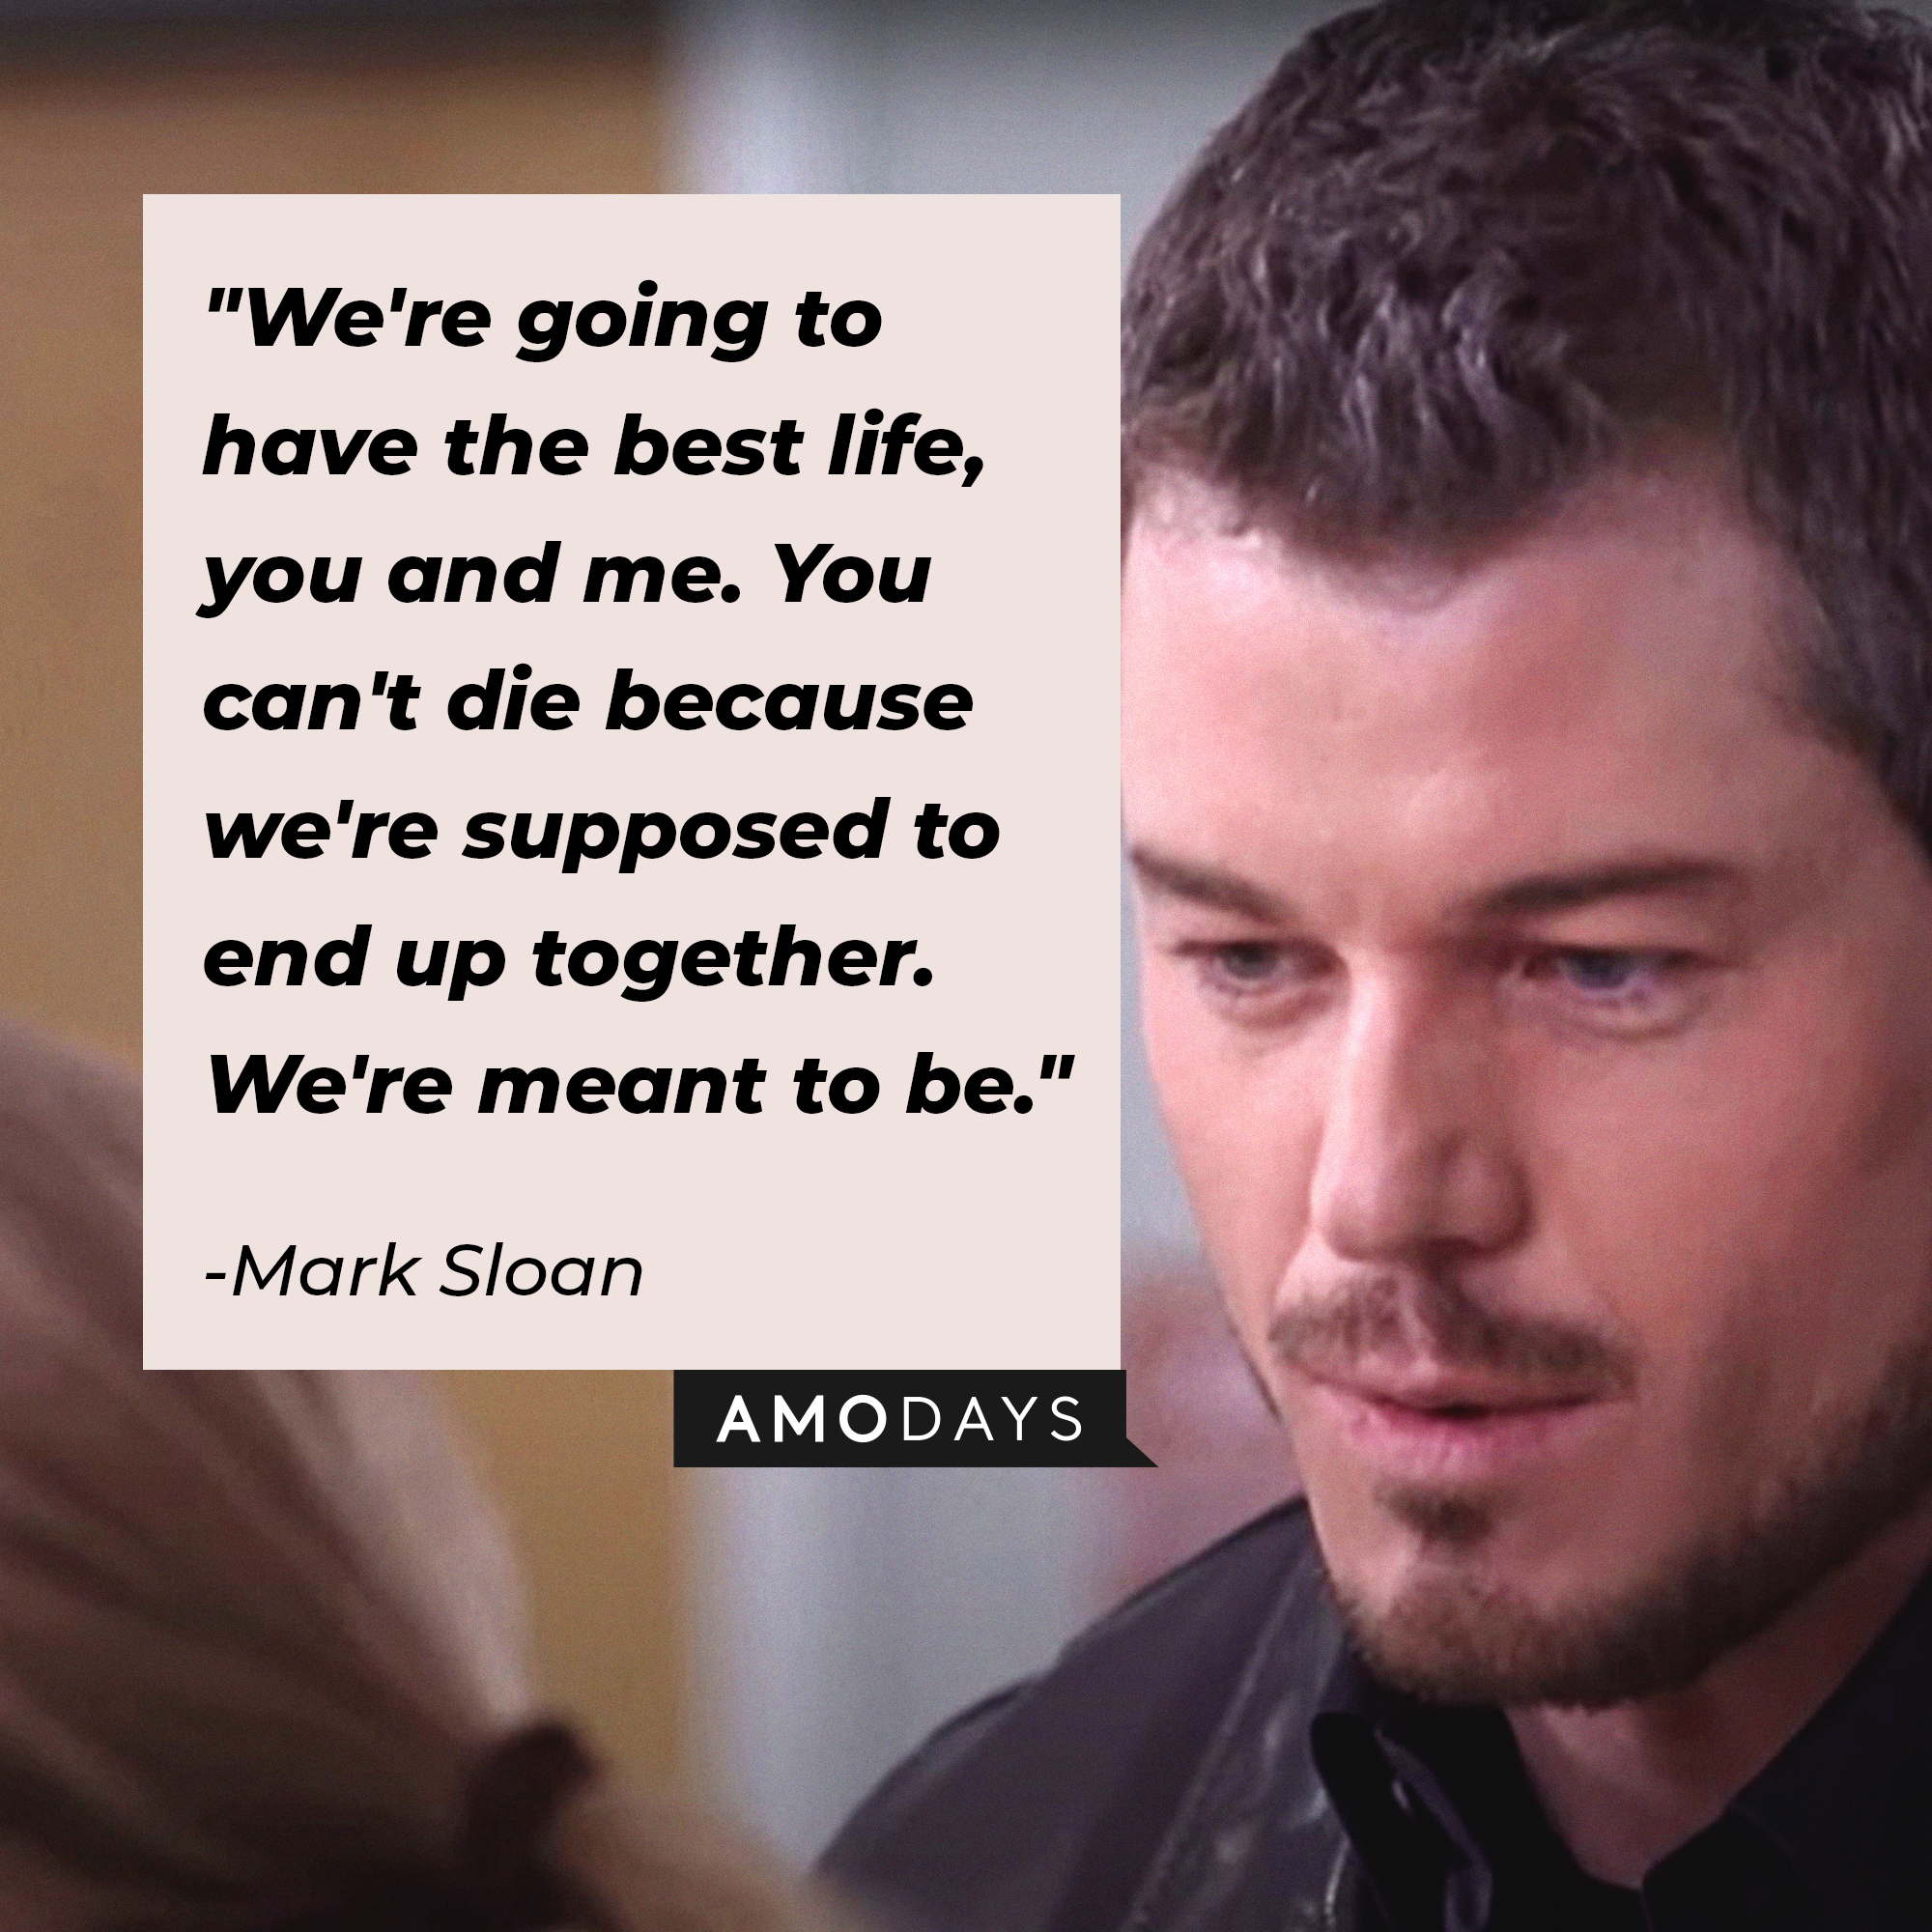 Mark Sloan's quote: "We're going to have the best life, you and me. You can't die because we're supposed to end up together. We're meant to be." | Image: AmoDays